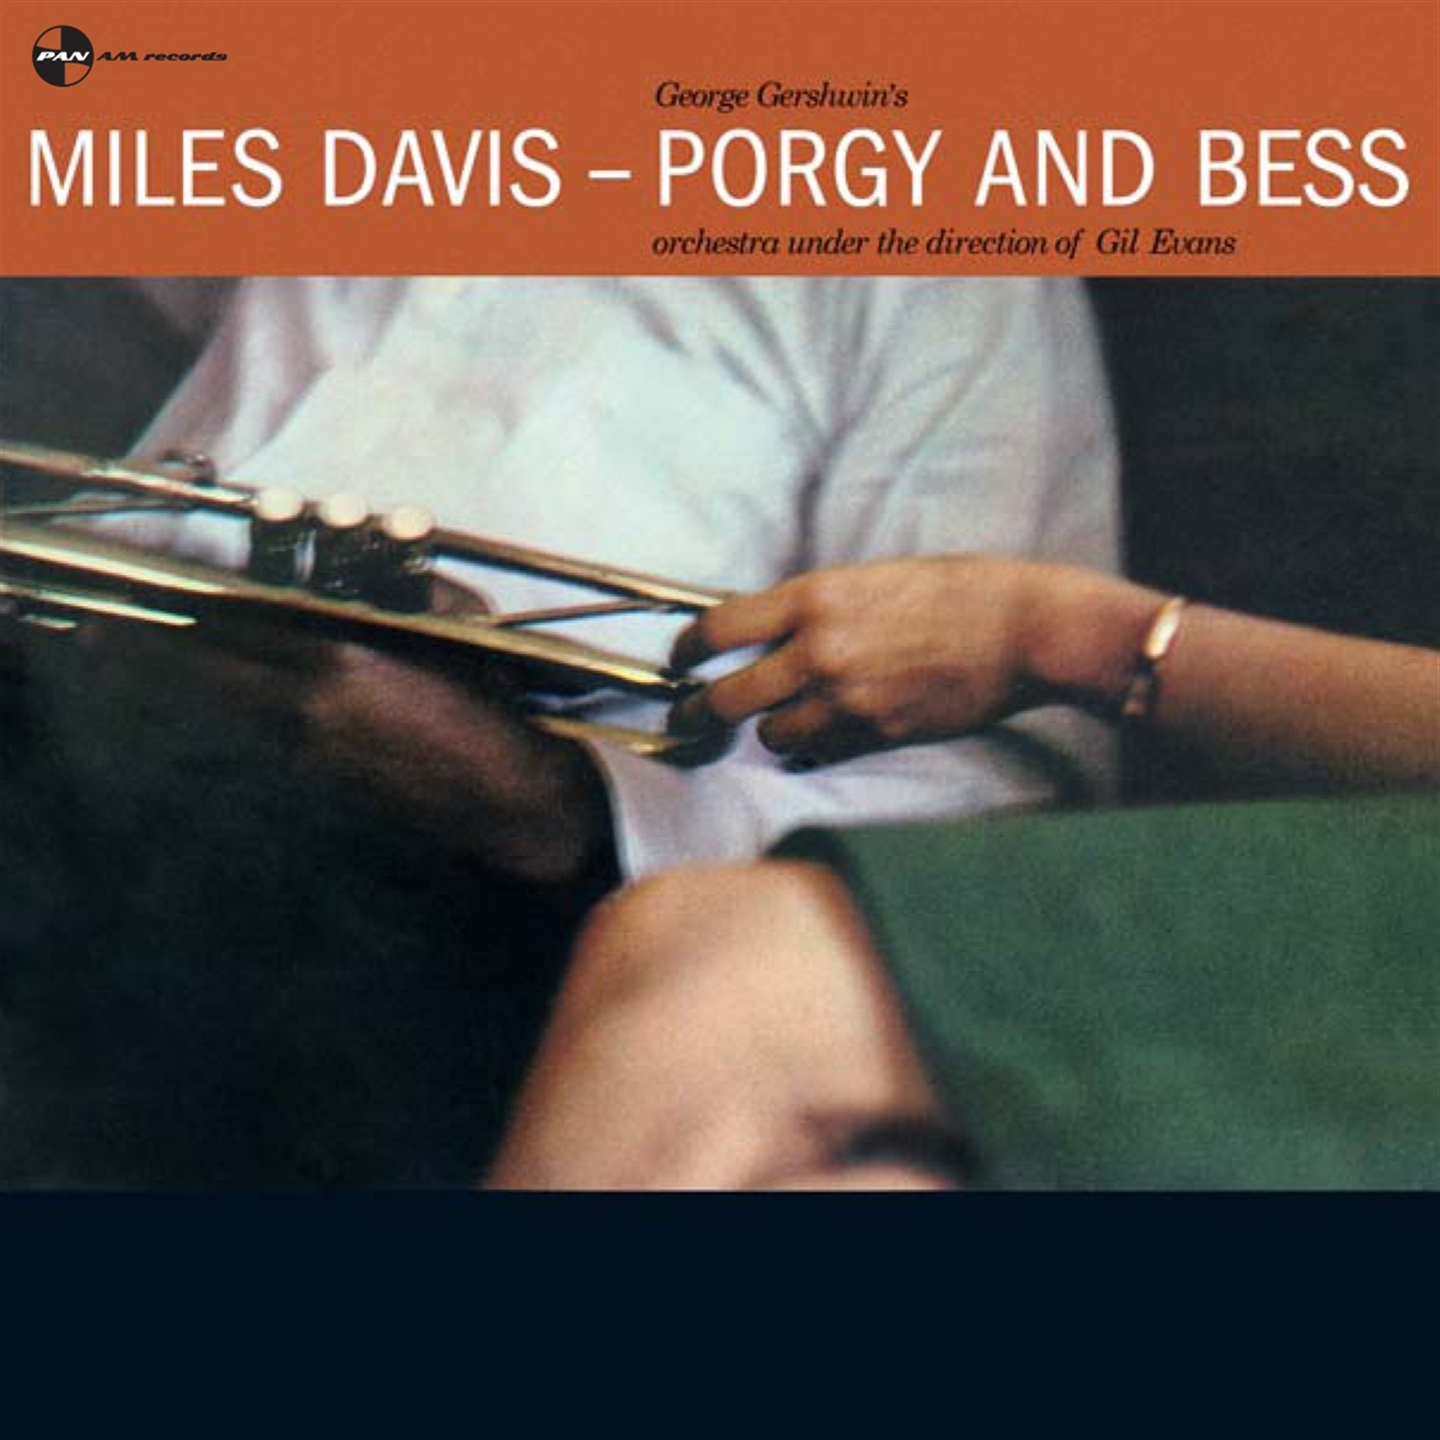 PORGY AND BESS [LP]